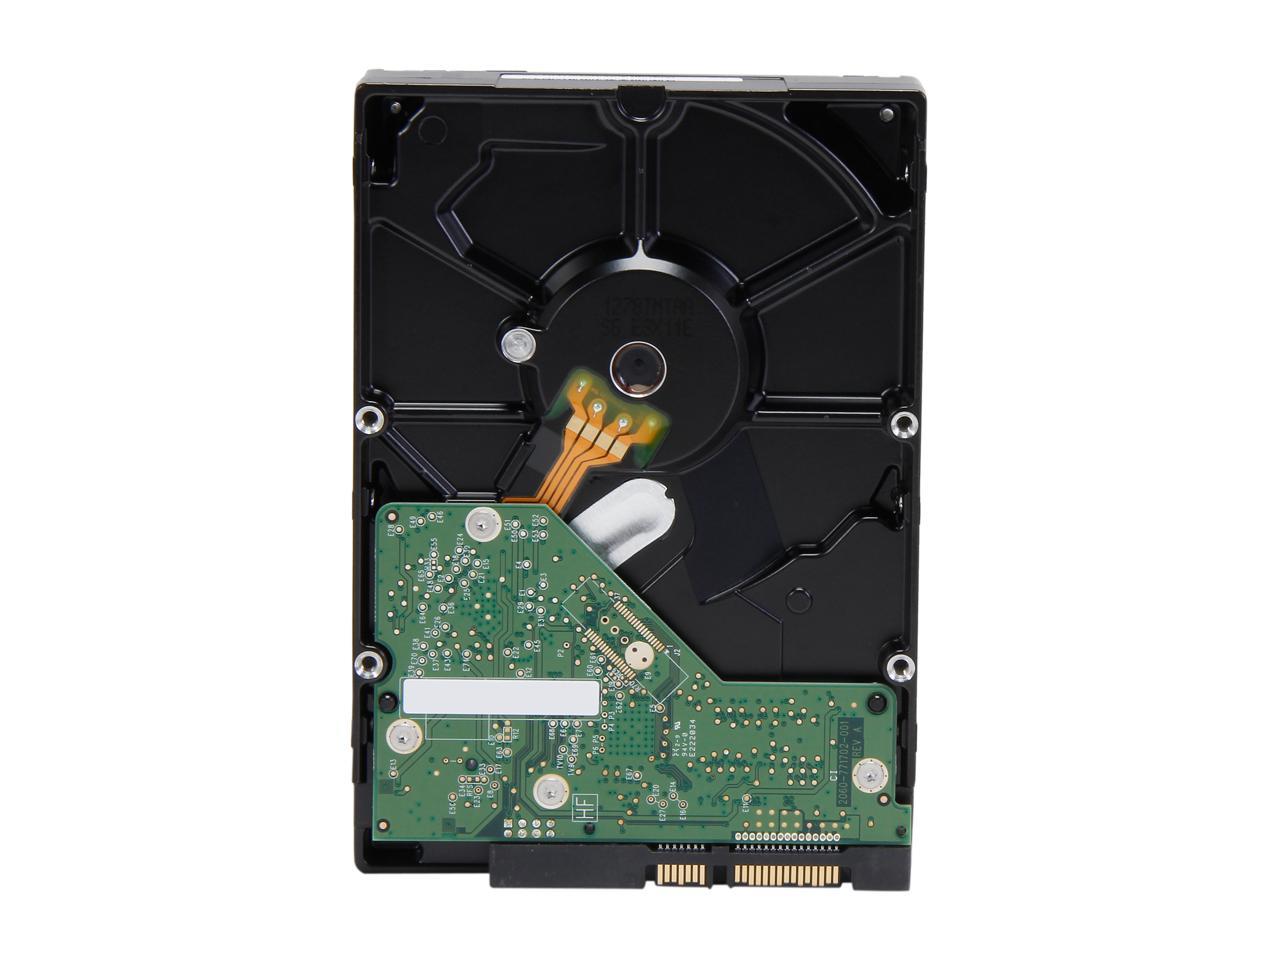 WD Re 500GB Datacenter Capacity Hard Disk Drive - 7200 RPM Class 